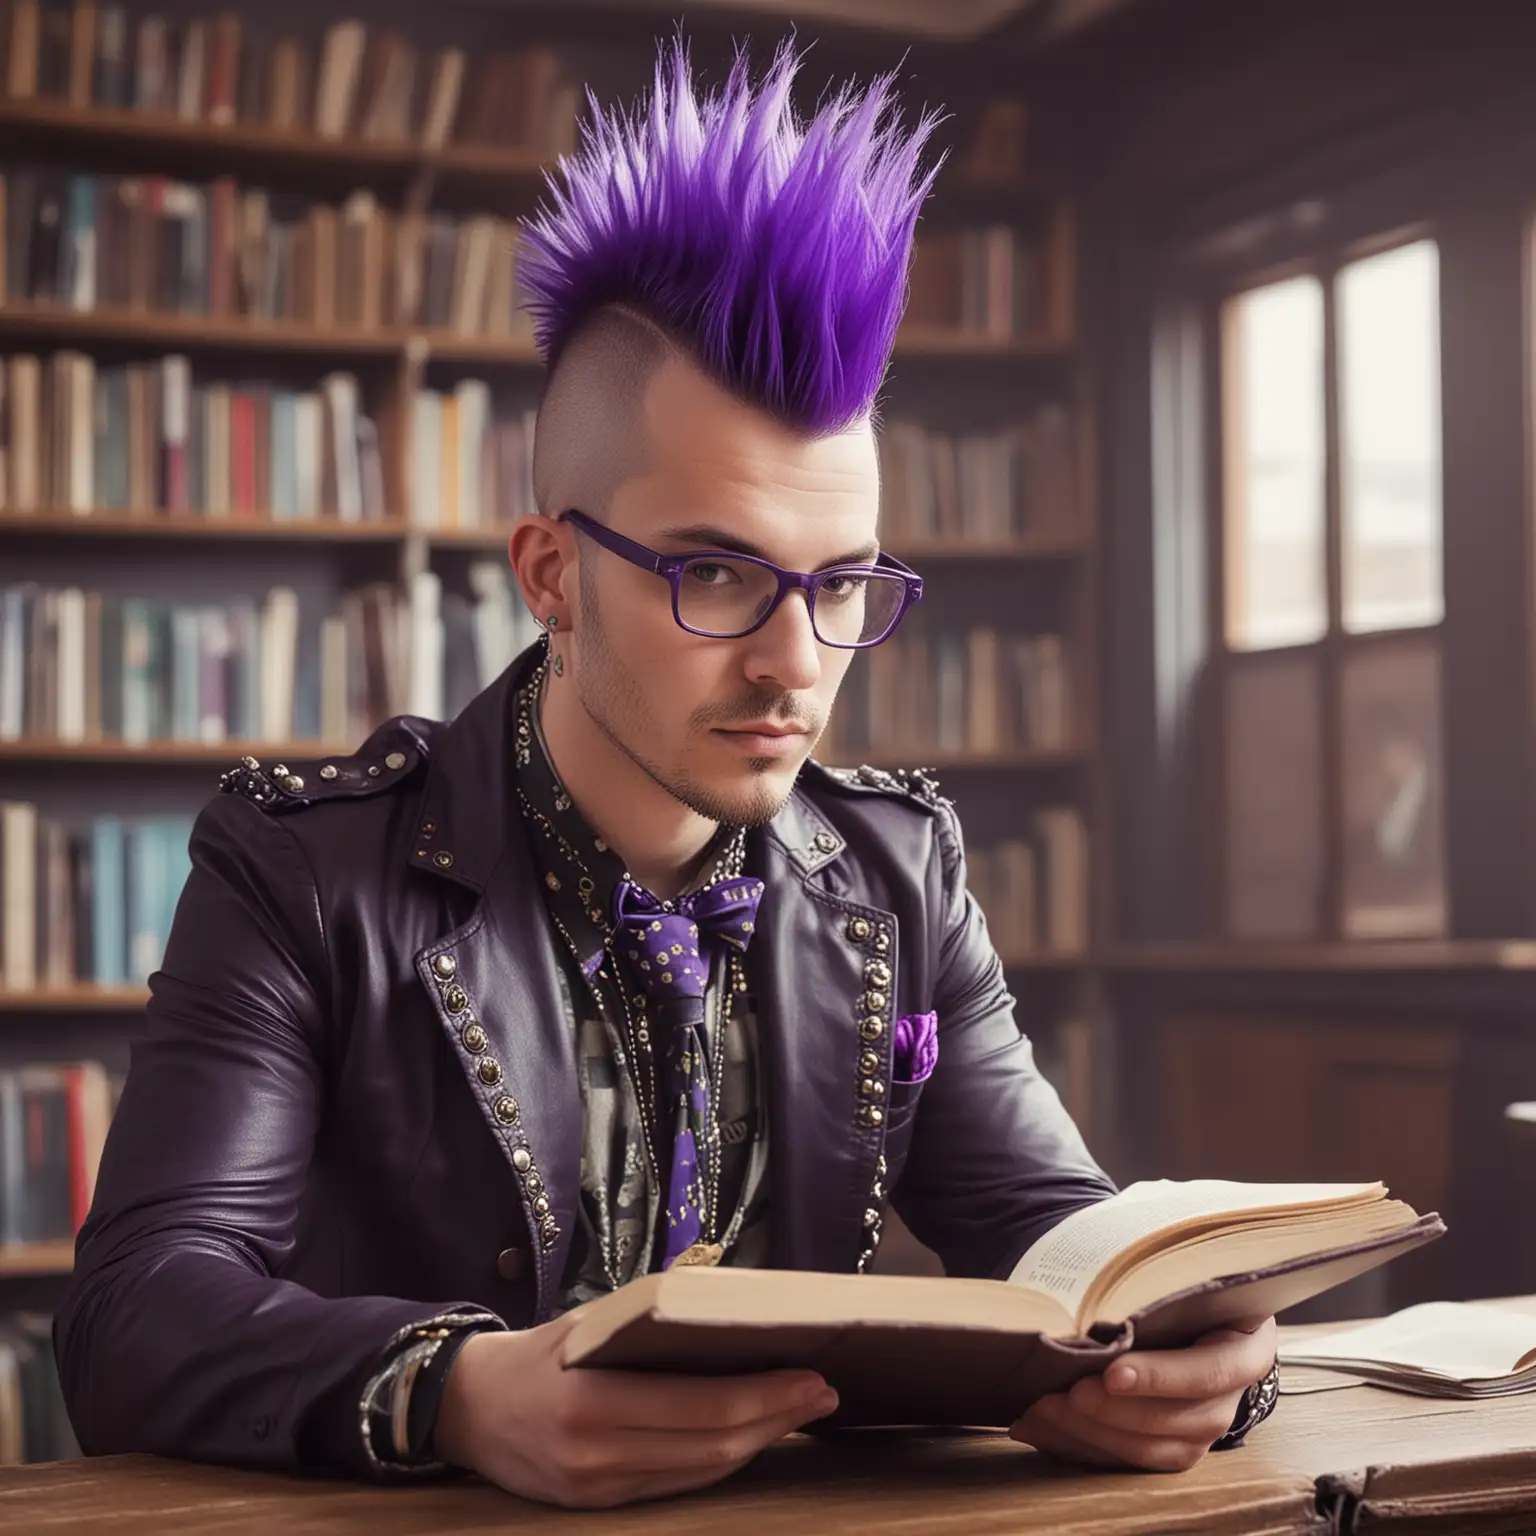 Punk Male Librarian with Purple Mohawk in Reading Room